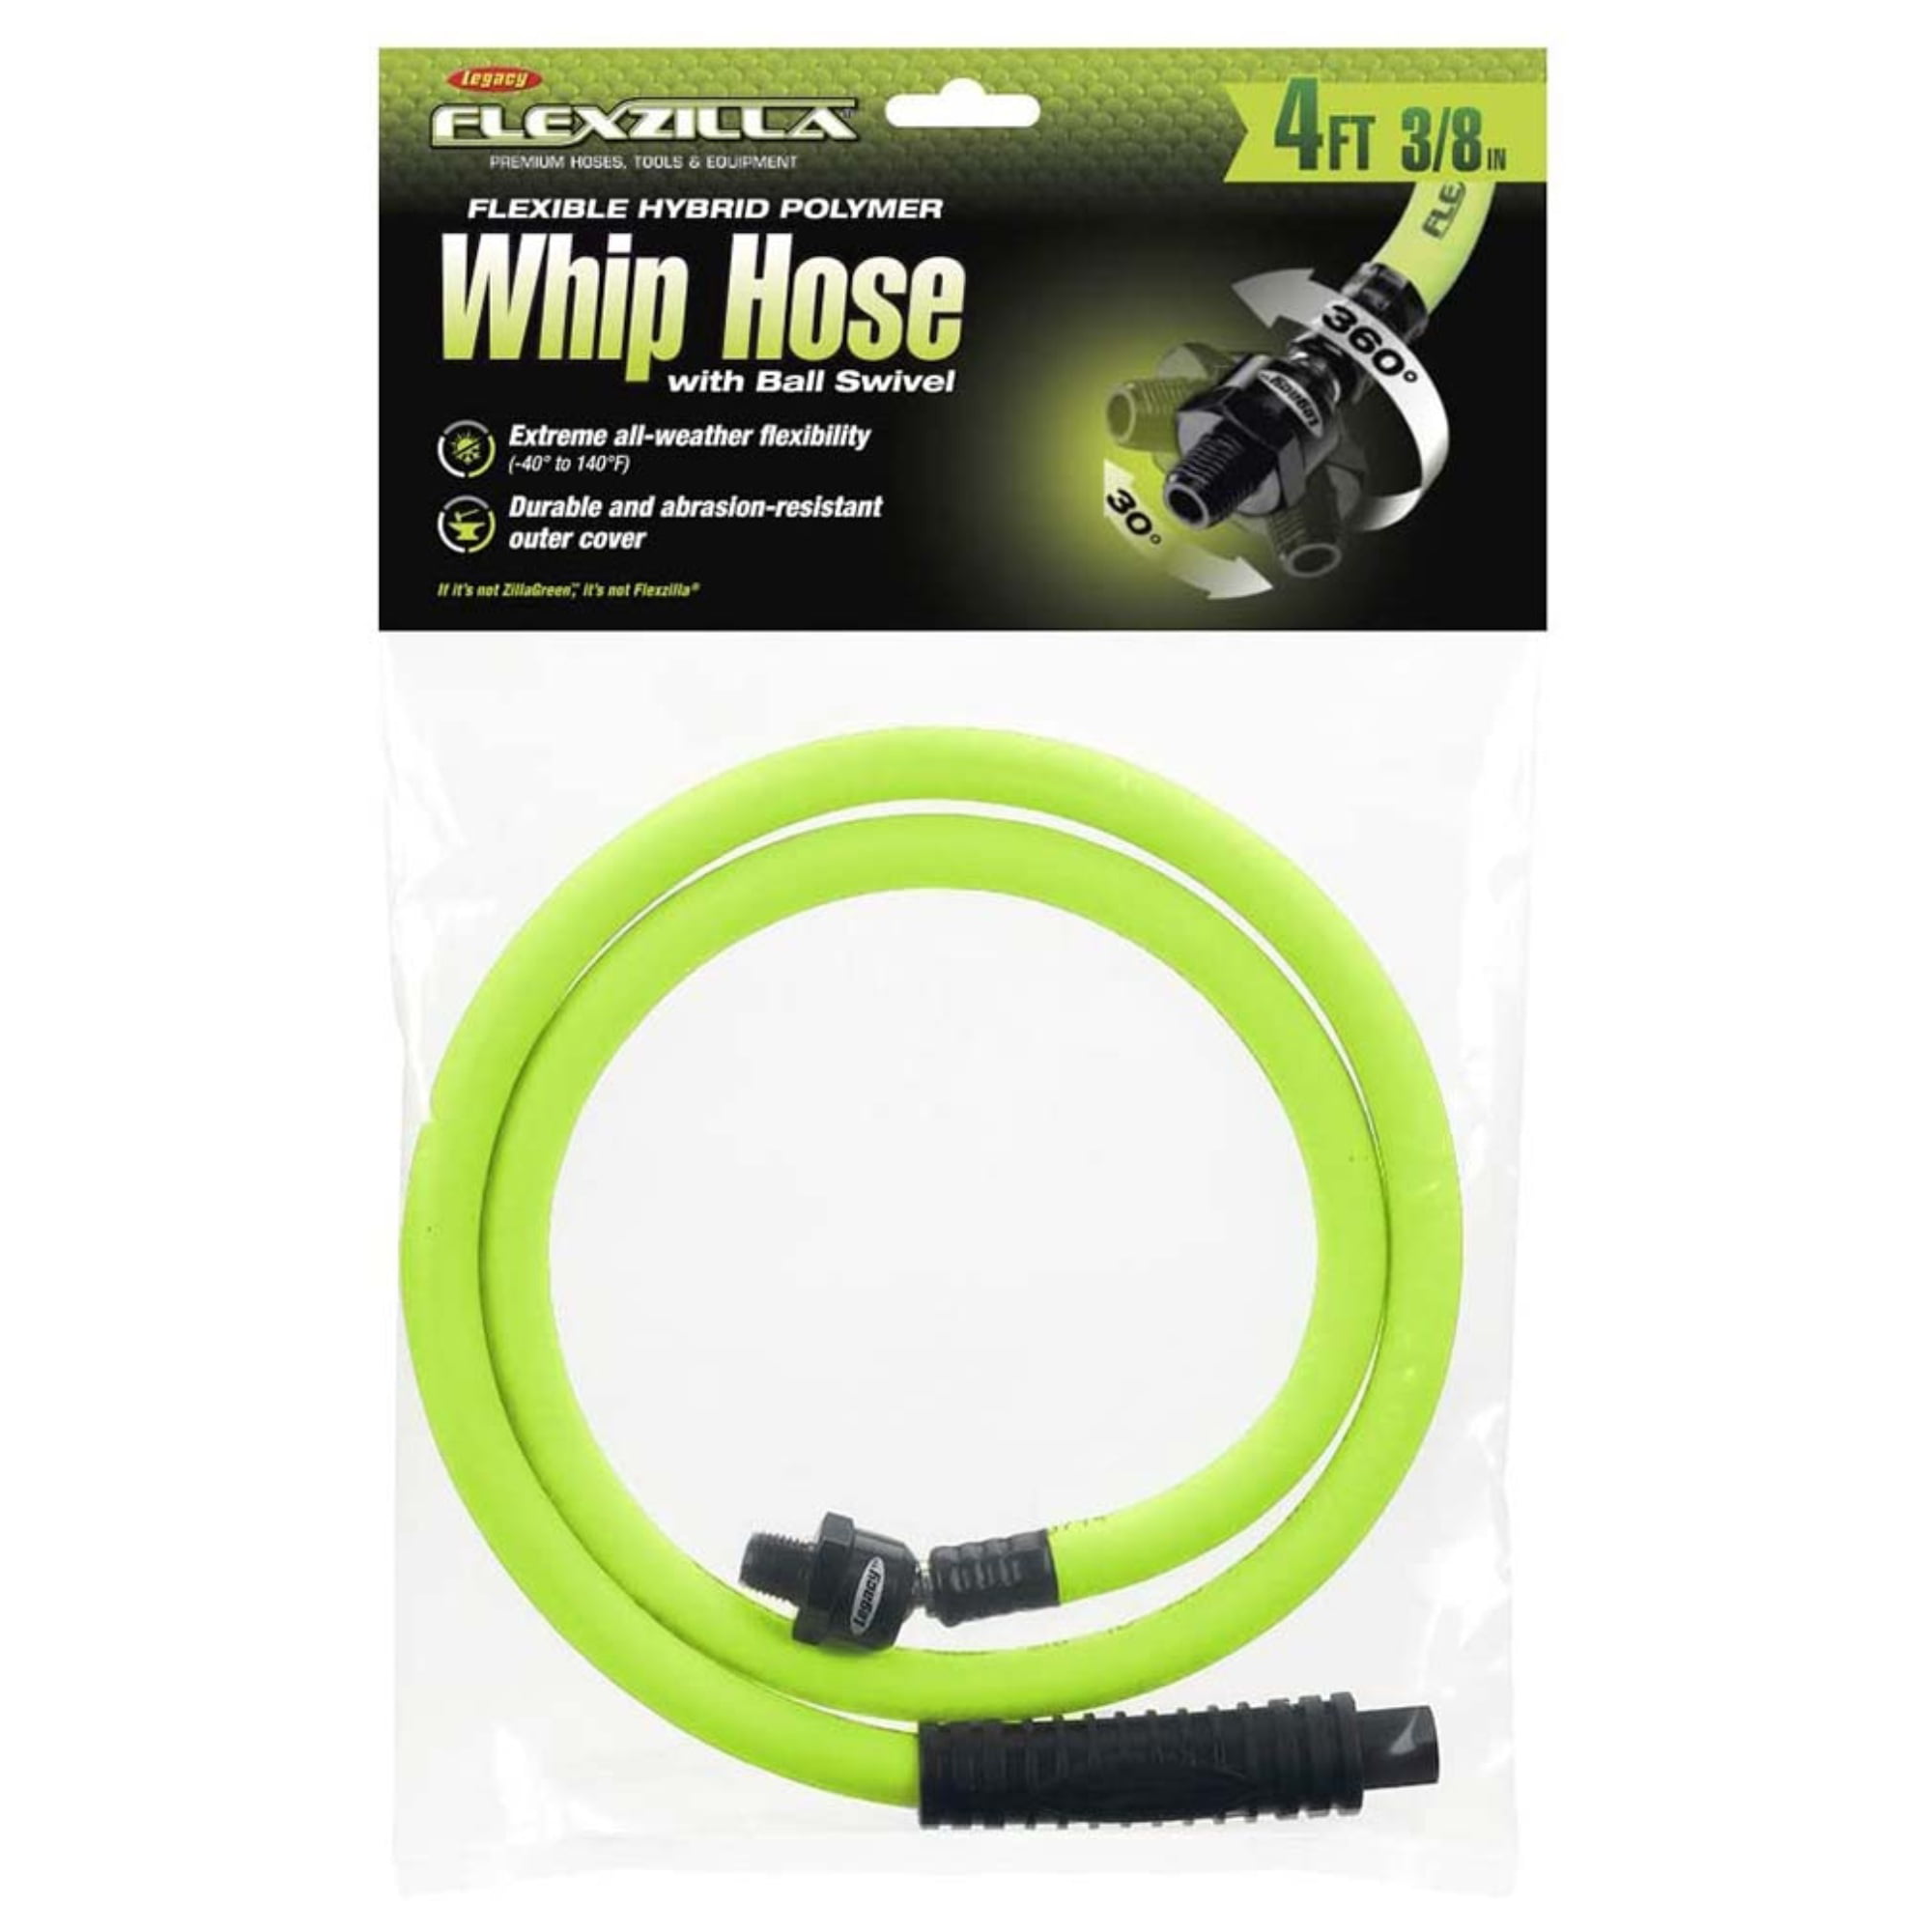 Flexzilla Hfz3802yw2b 3/8" X 2' FT Air Hose Whip With Ball Swivel Zilawhip for sale online 